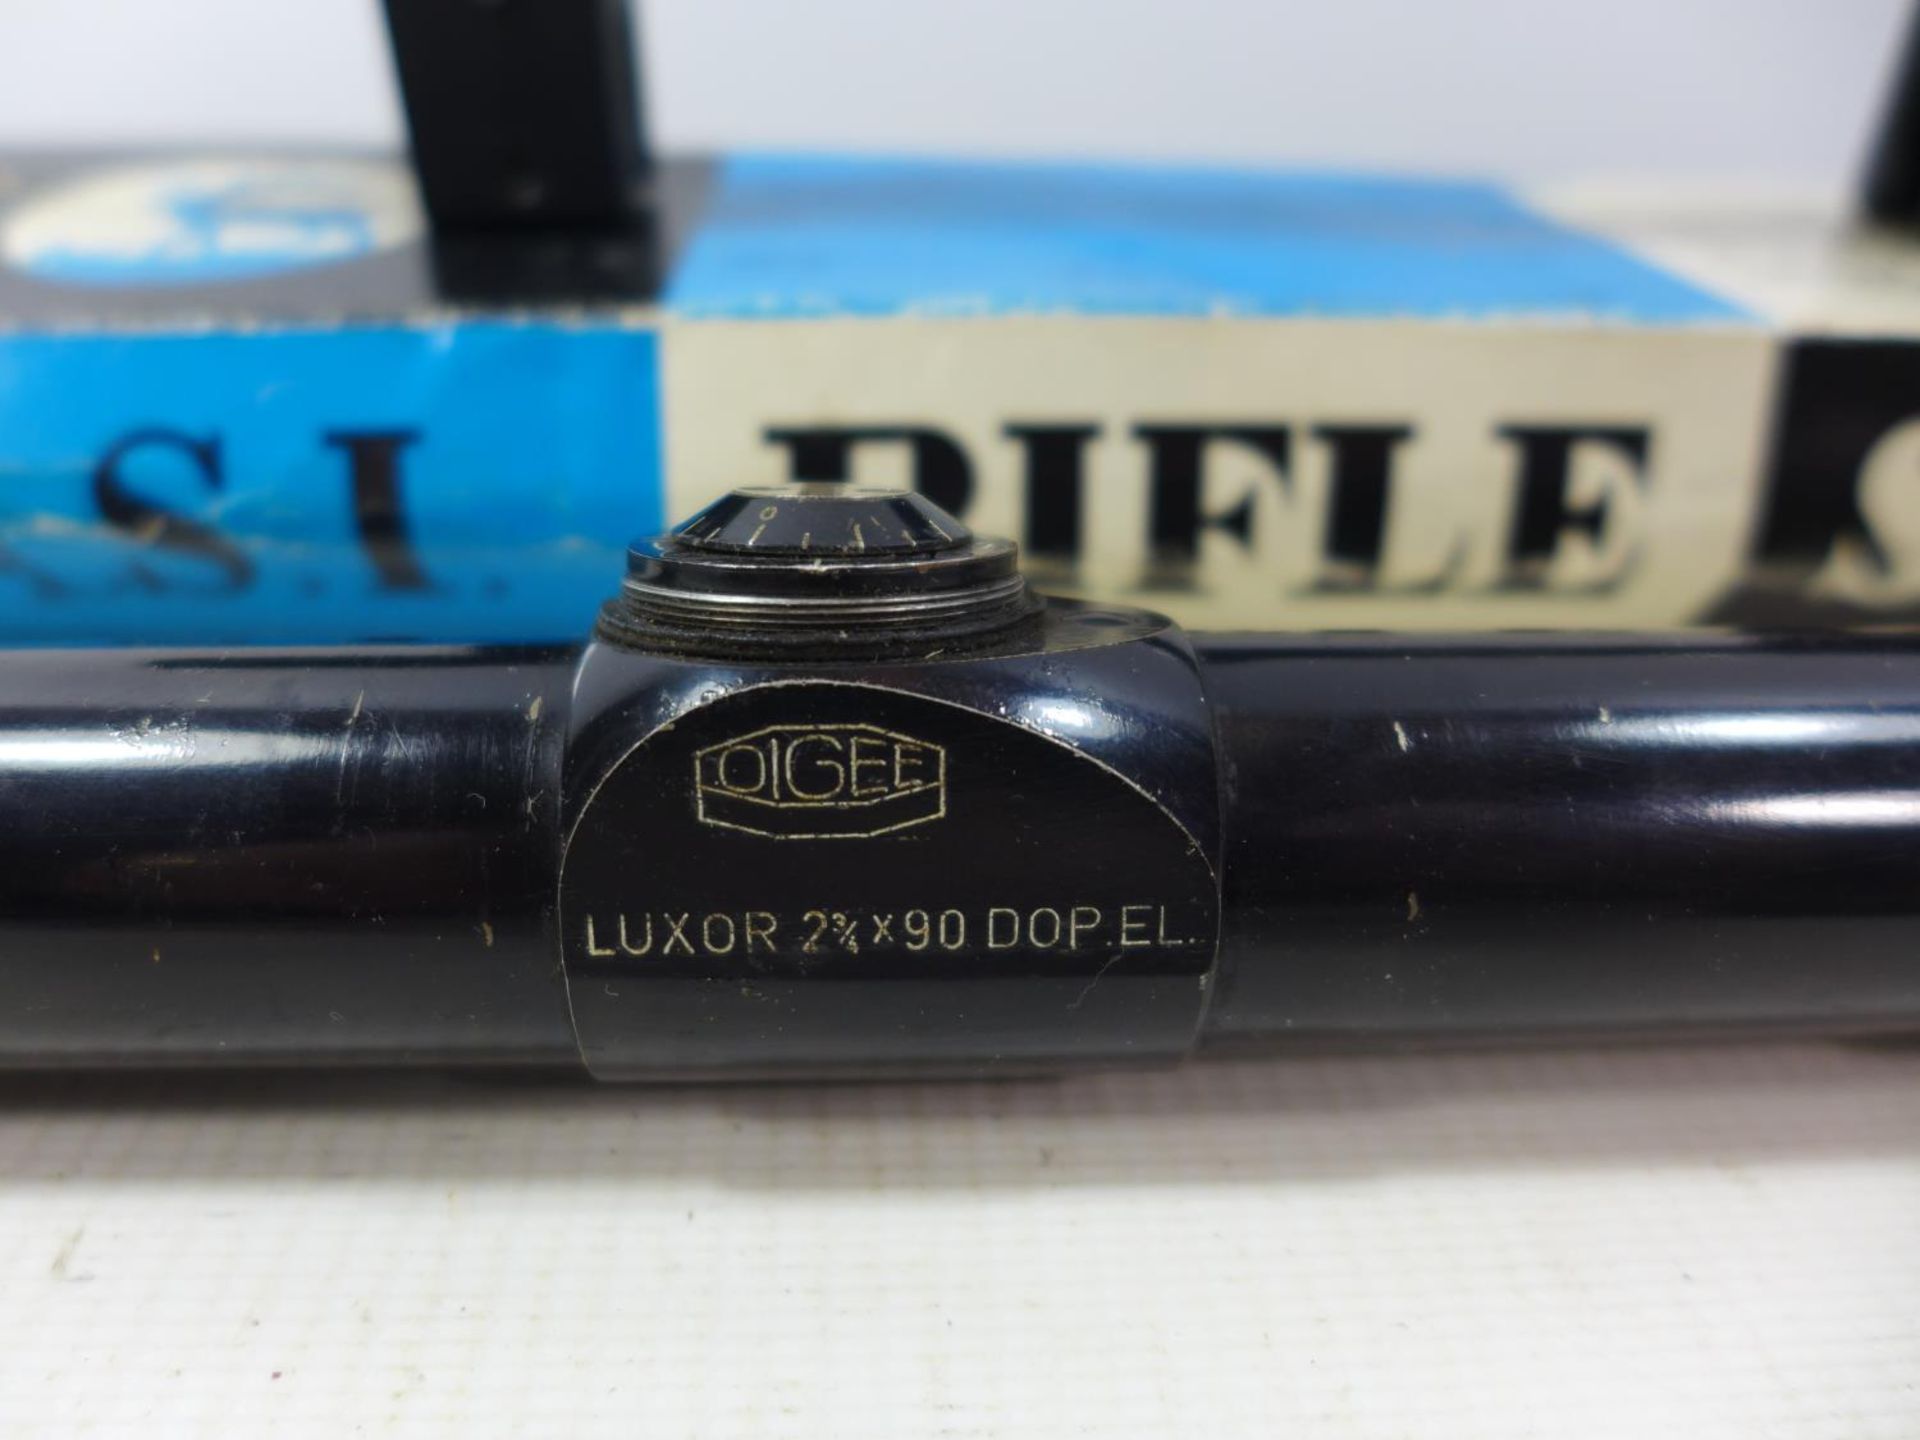 A BOXED A.S.I. 4 X 20 TELESCOPIC SIGHT AND A OIGEE LUXOR 2 3/4 X 90 SIGHT (2) - Image 3 of 3